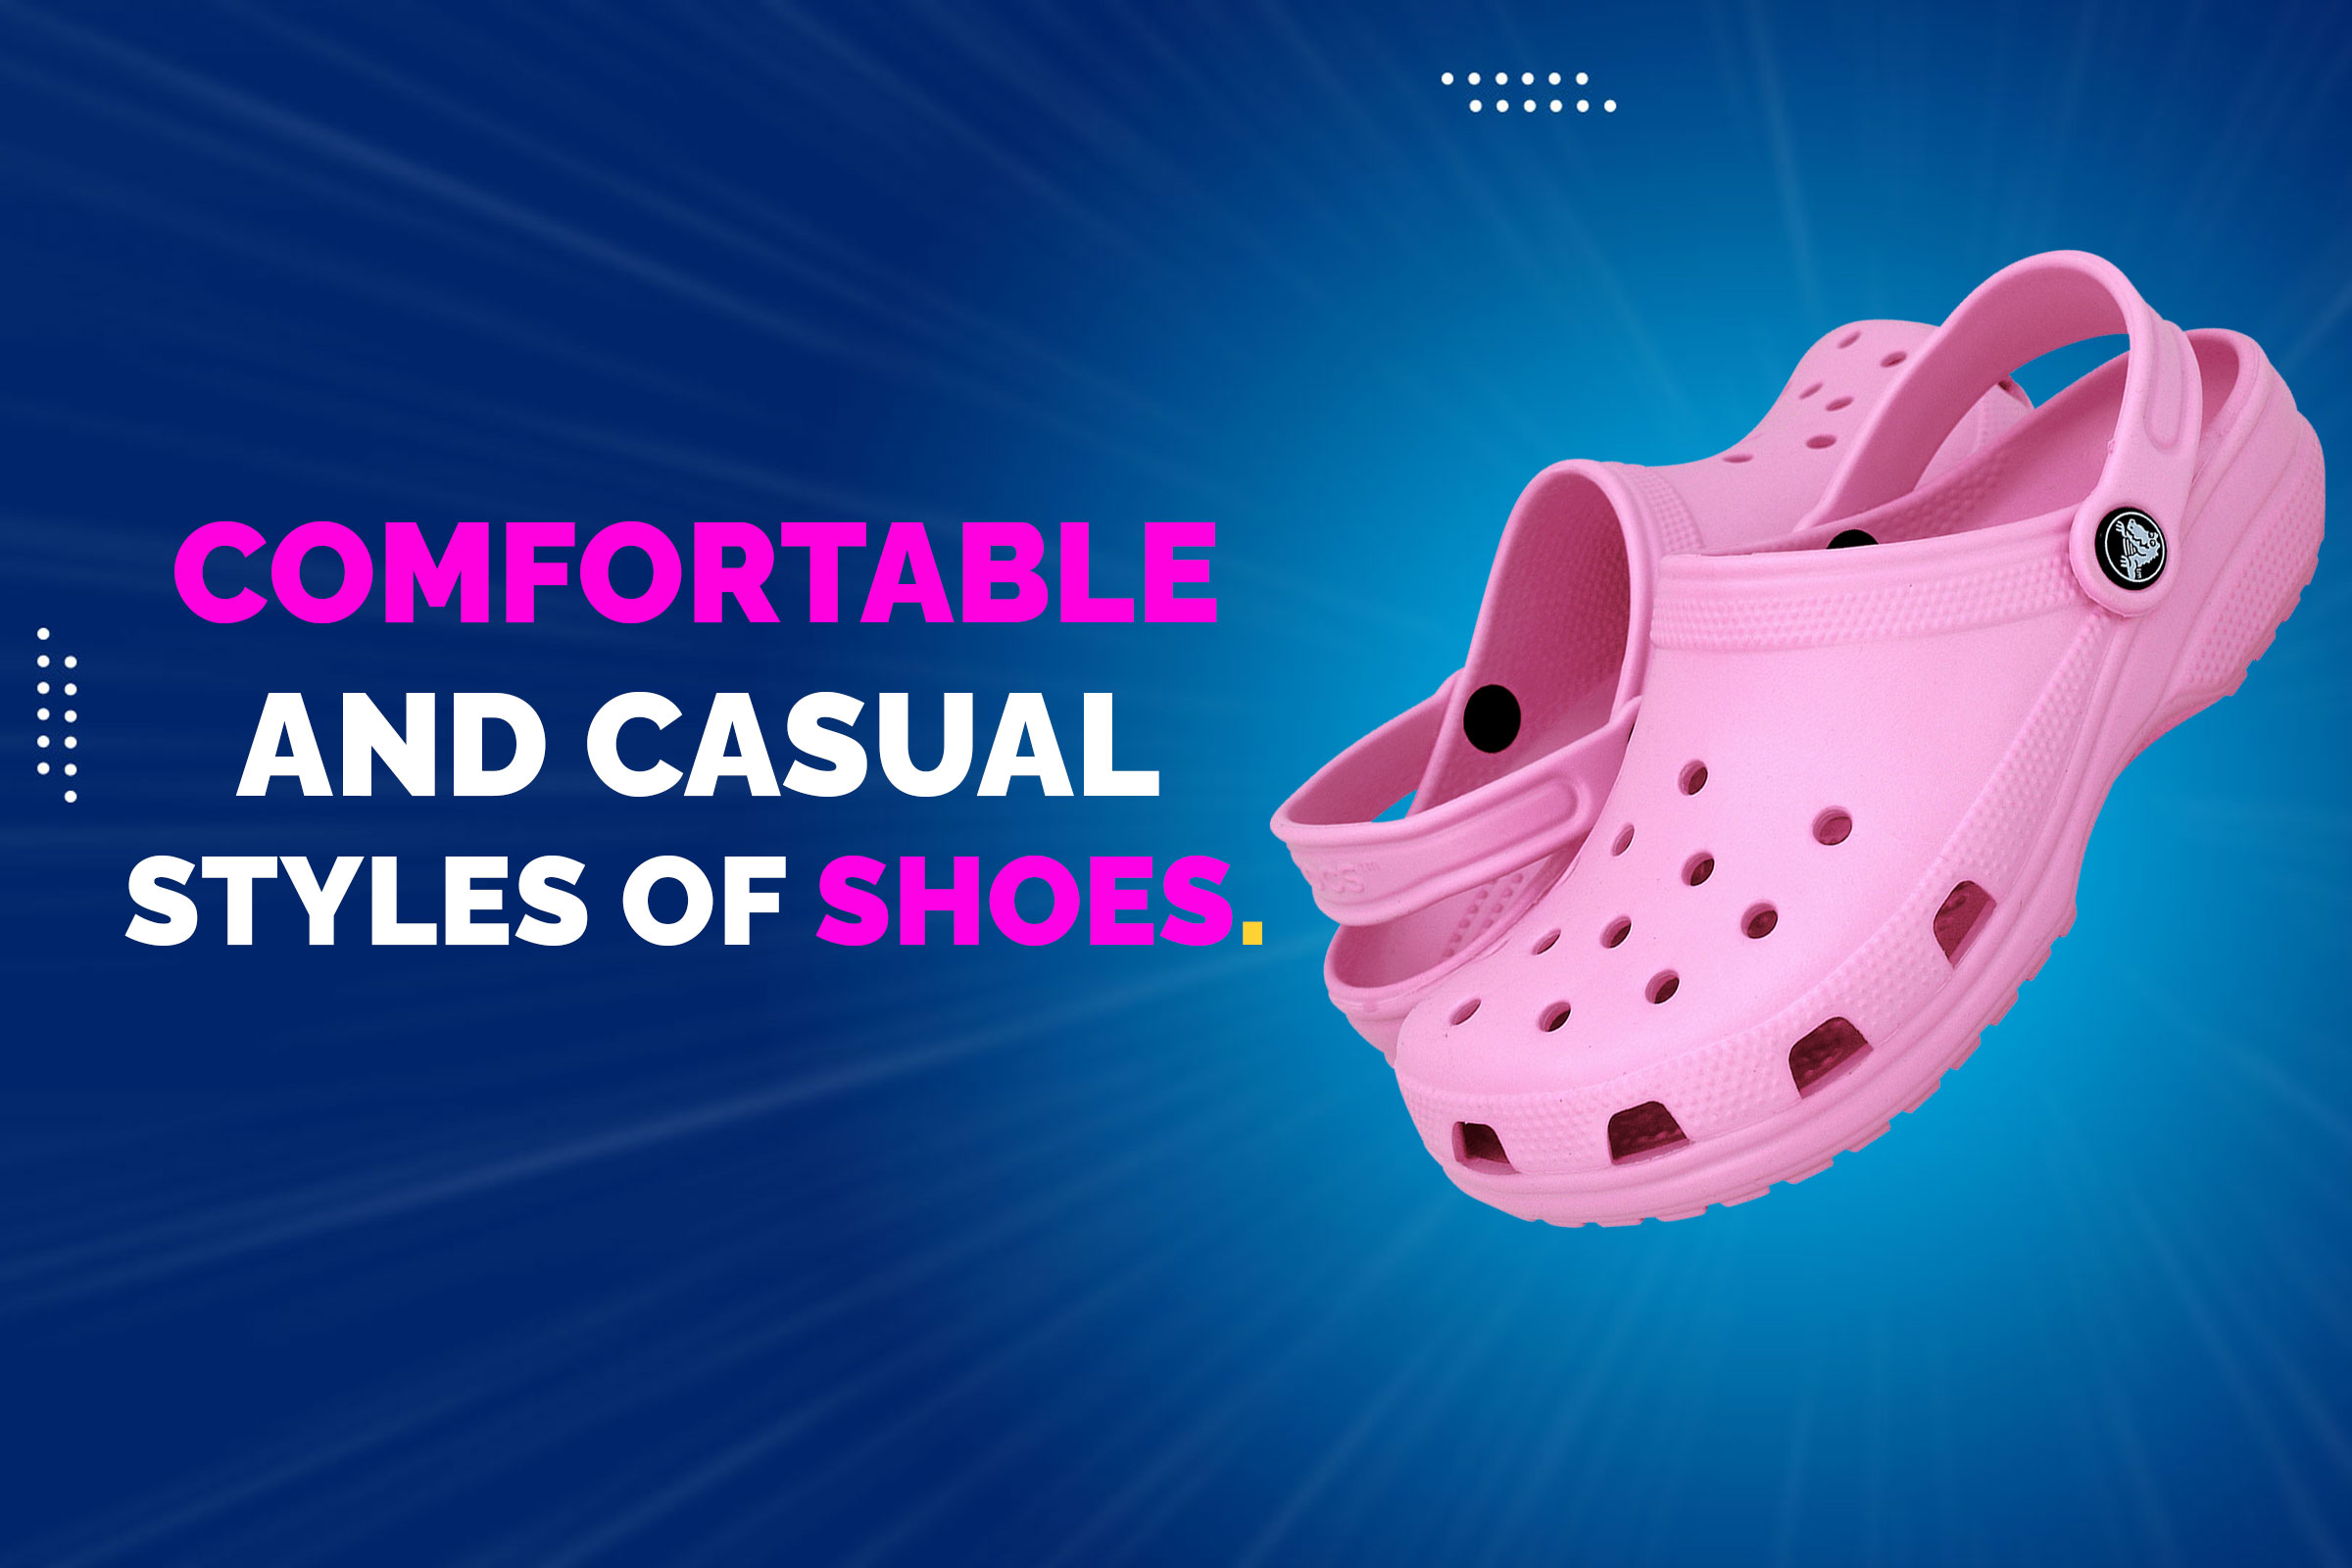 The Truth About Crocs: An Review